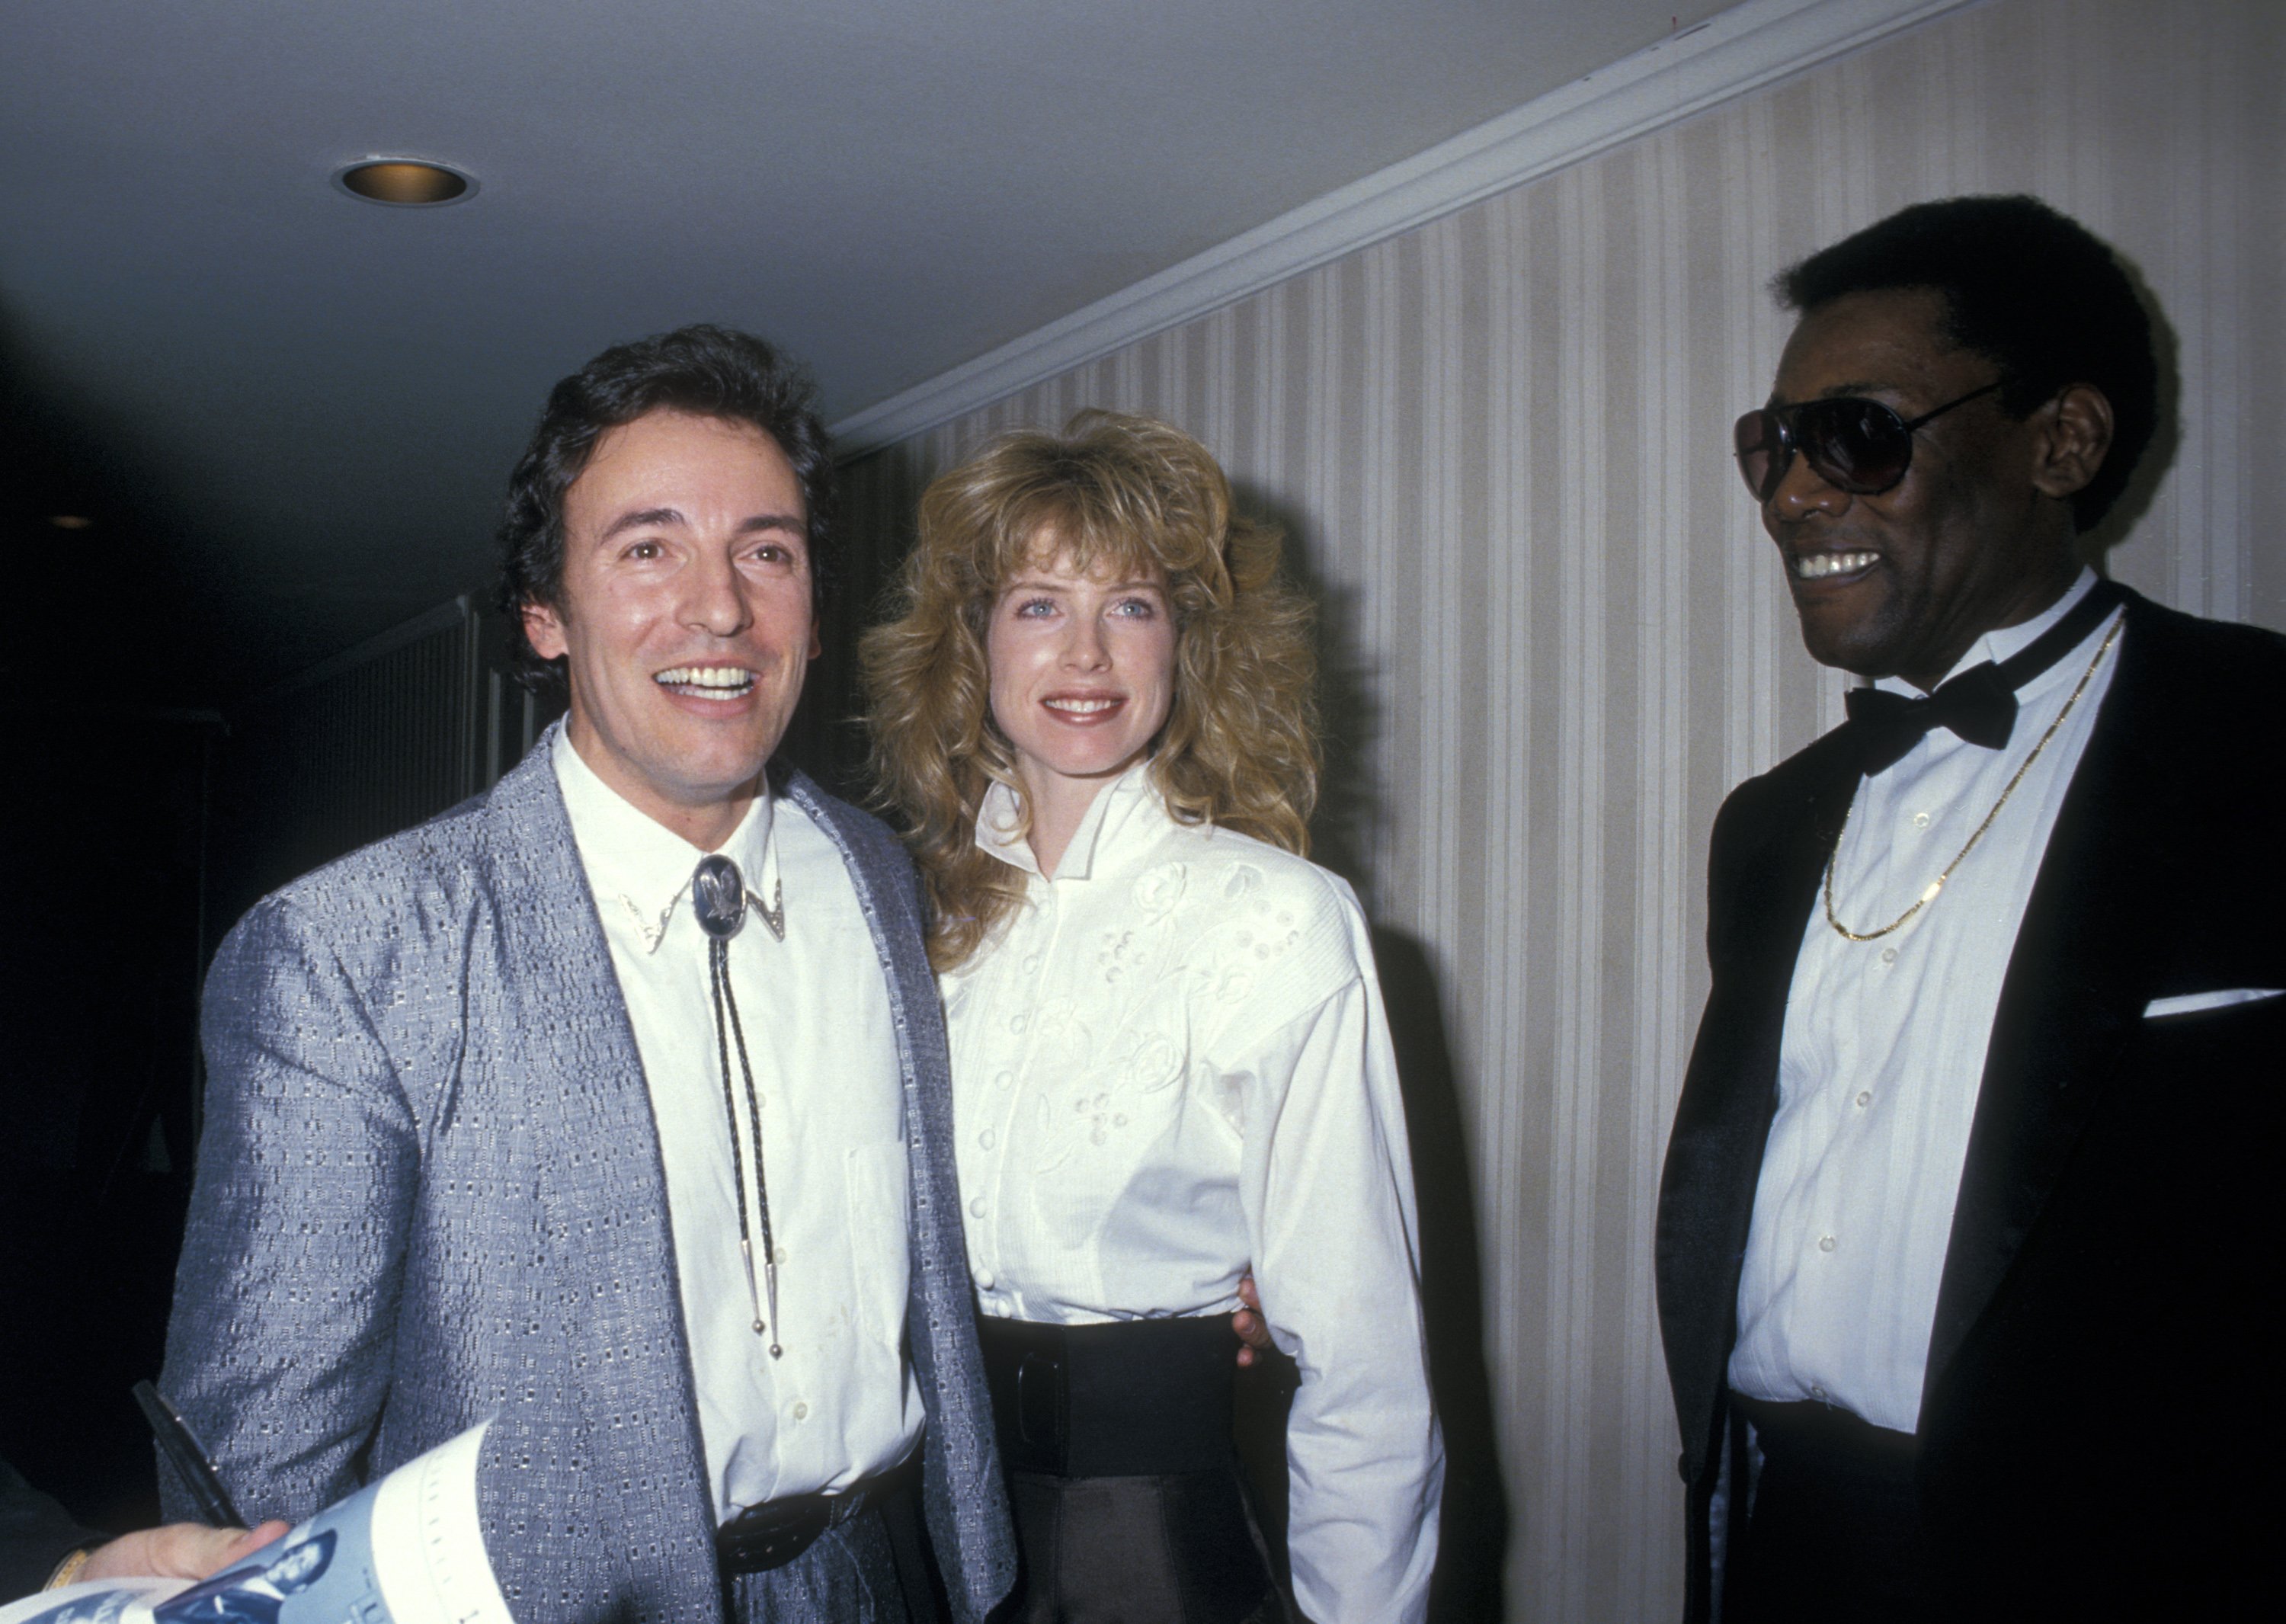 Bruce Springsteen, Julianne Phillips and Guest during the 3rd Annual Rock & Roll Hall of Fame Awards in 1988 | Source: Getty Images